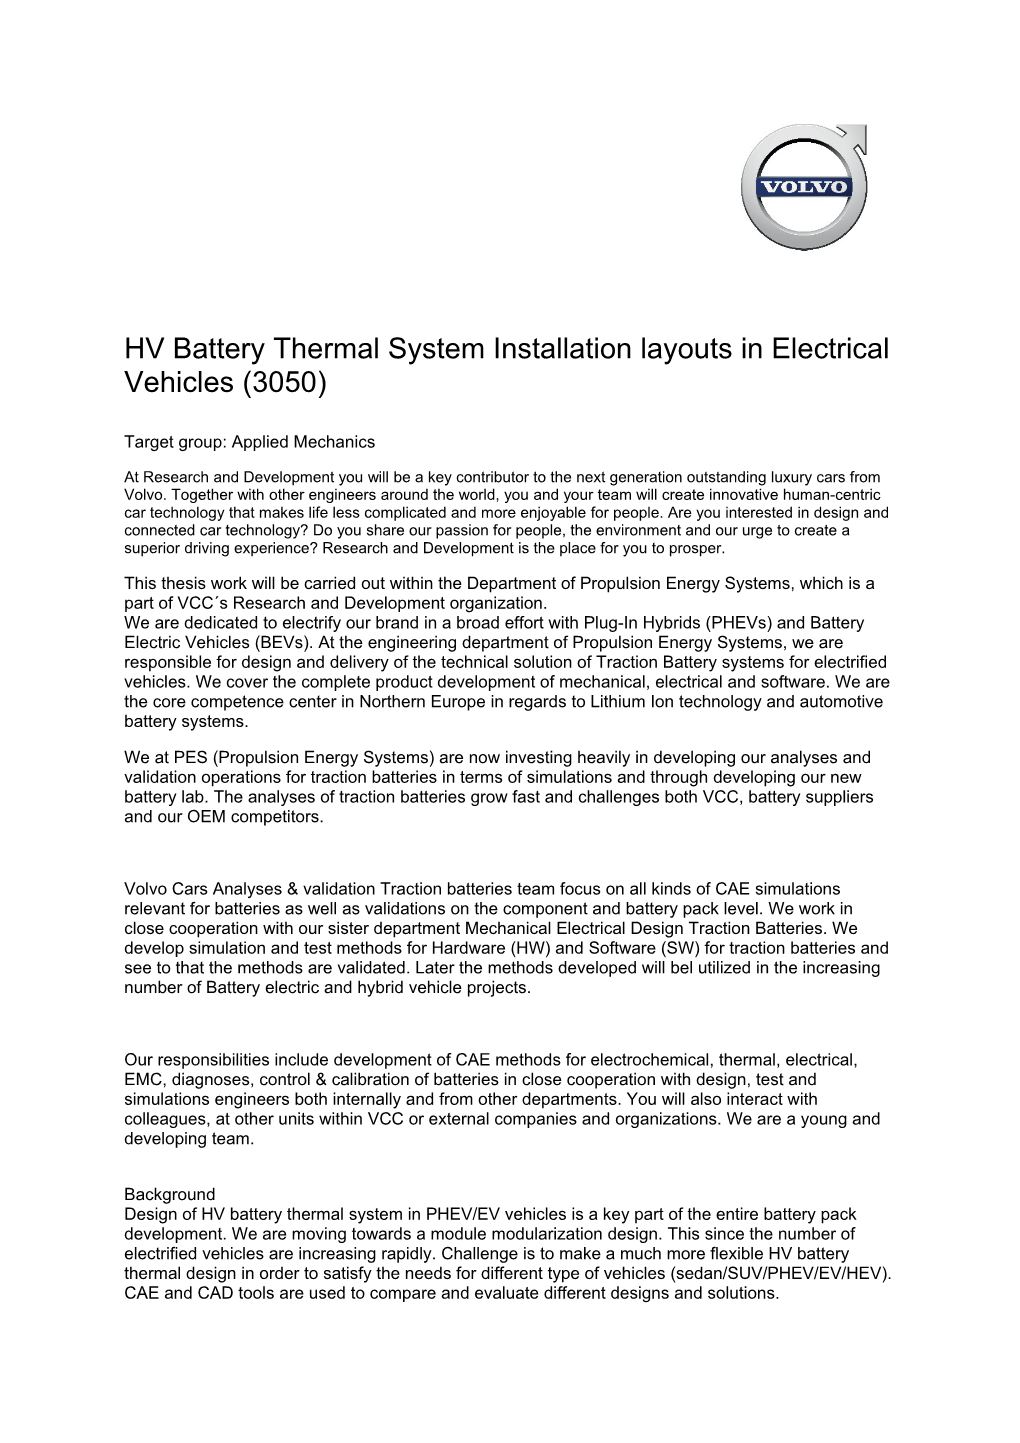 HV Battery Thermal System Installation Layouts in Electrical Vehicles (3050) Target Group